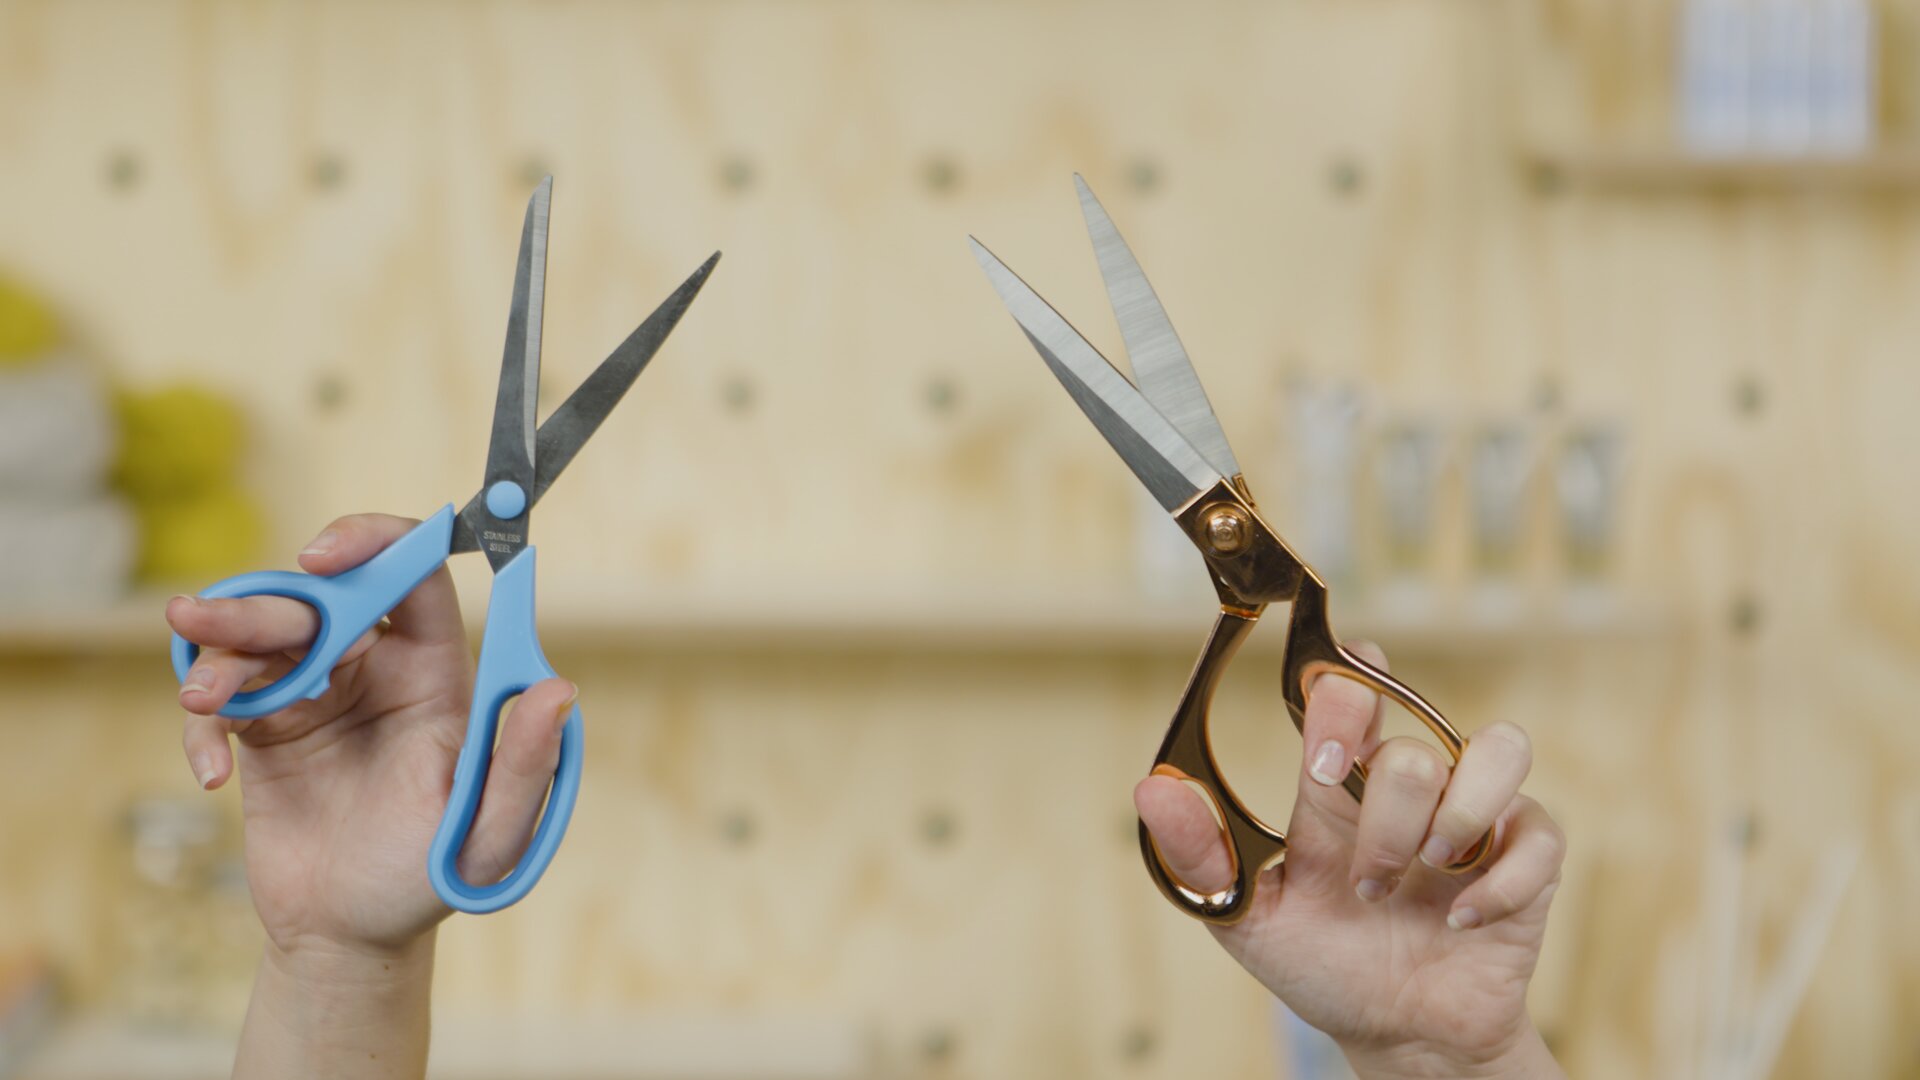 Scissors & Cutting Tools Buying Guide